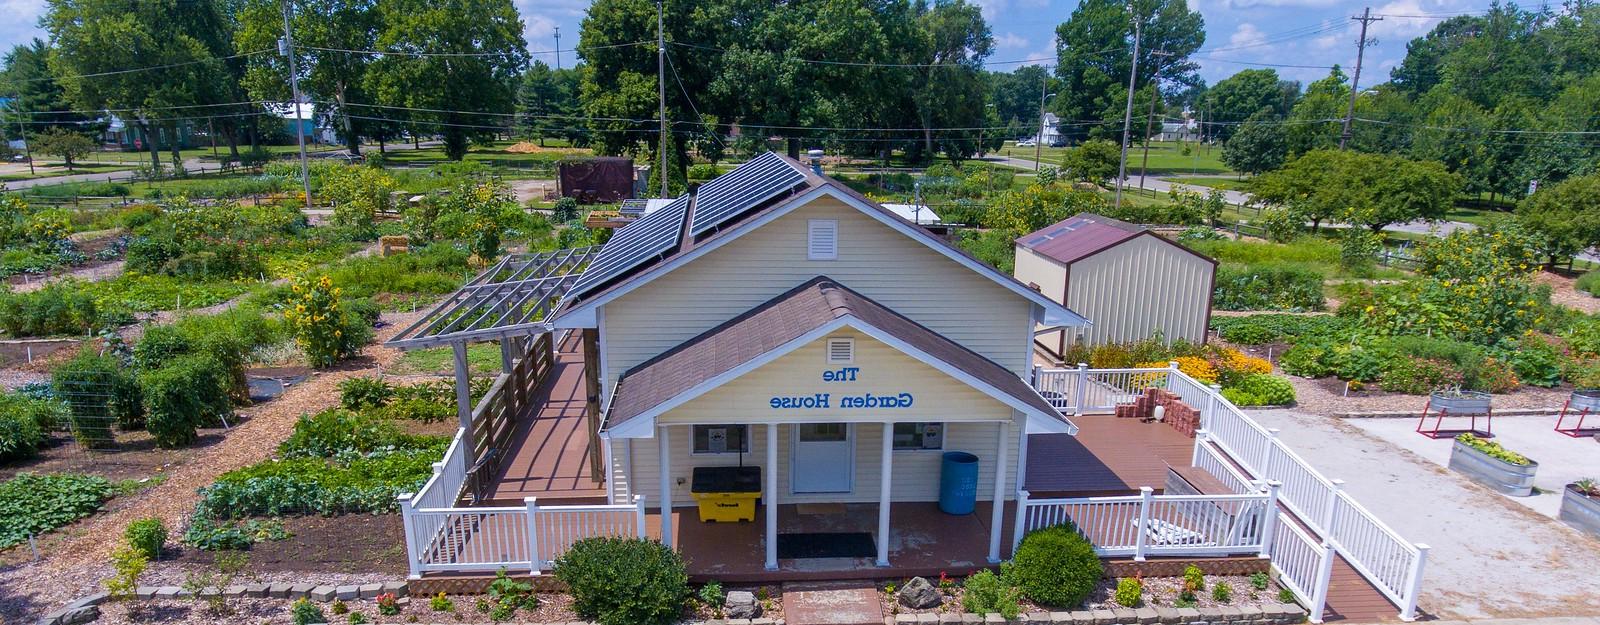 Yellow house with solar panels on the right side of the roof